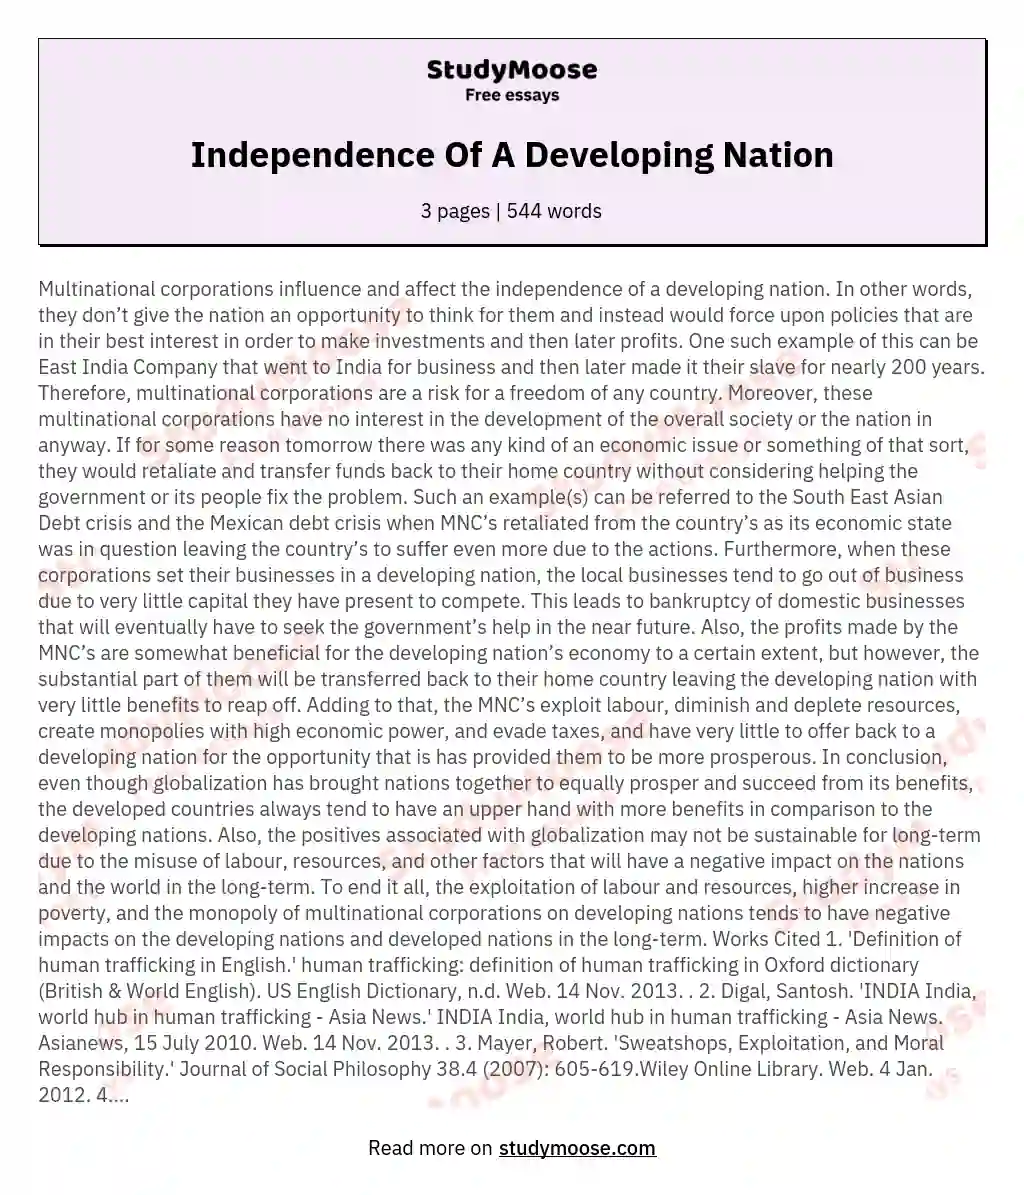 Independence Of A Developing Nation essay